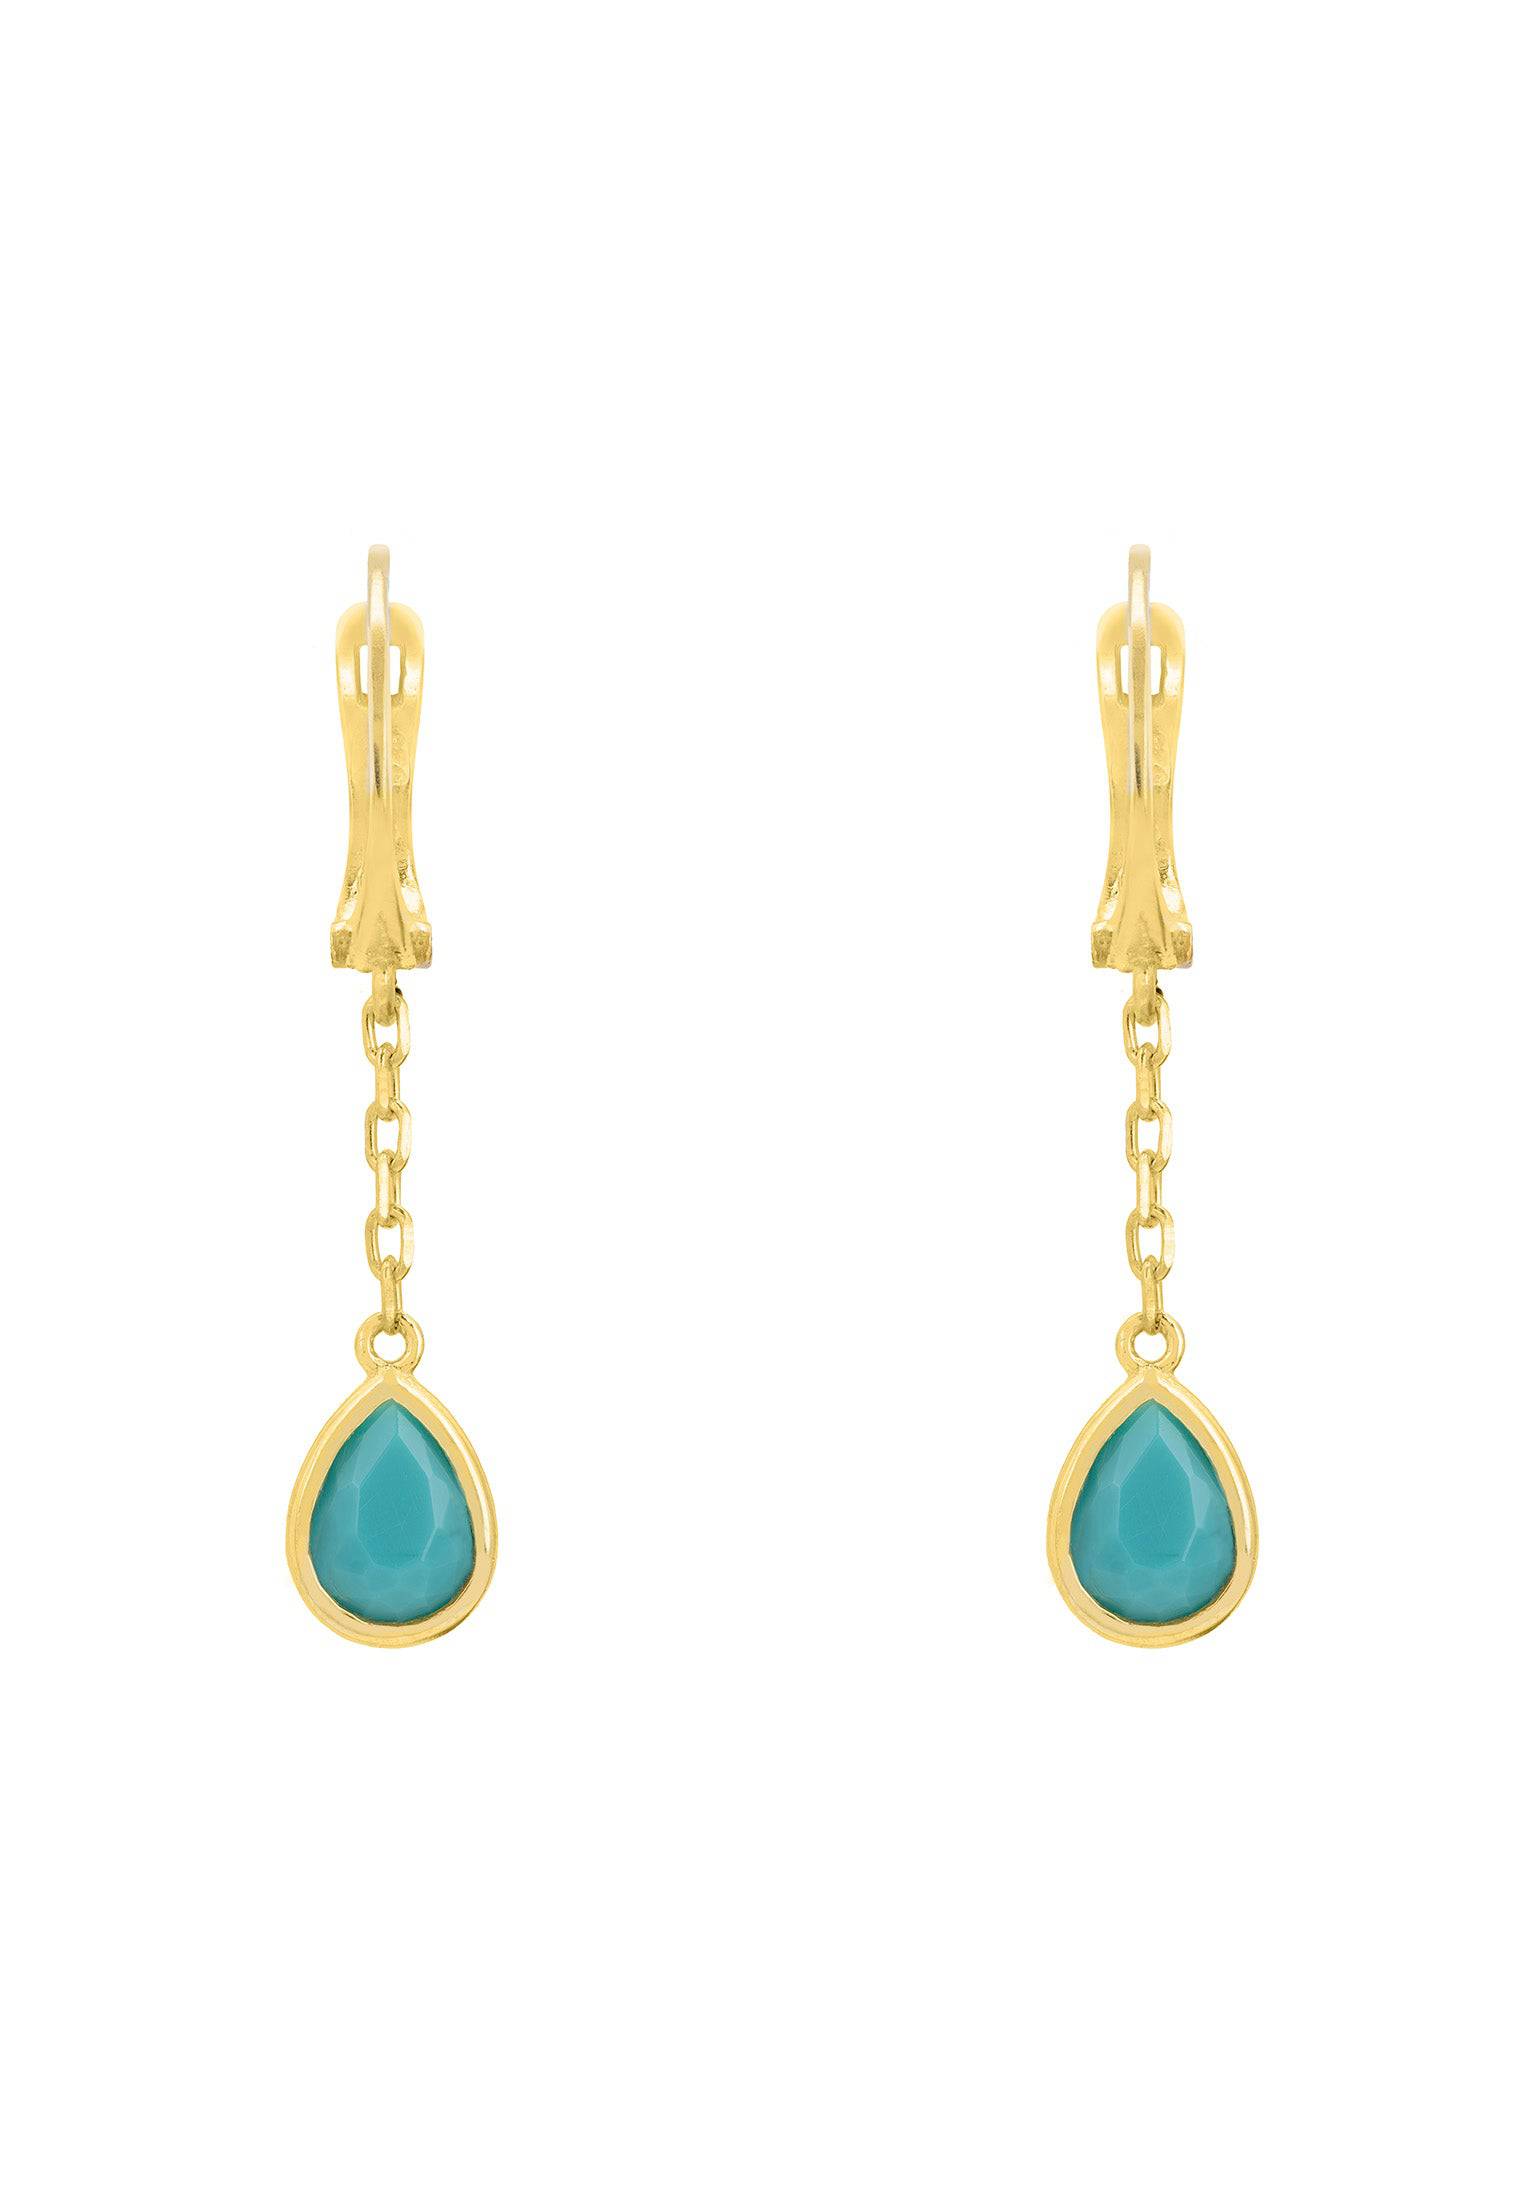 Gold Turquoise Pisa Chain Drop Earrings - Capri Collection Jewelry for Everyday Styling and Birthstones - Jewelry & Watches - Bijou Her -  -  - 